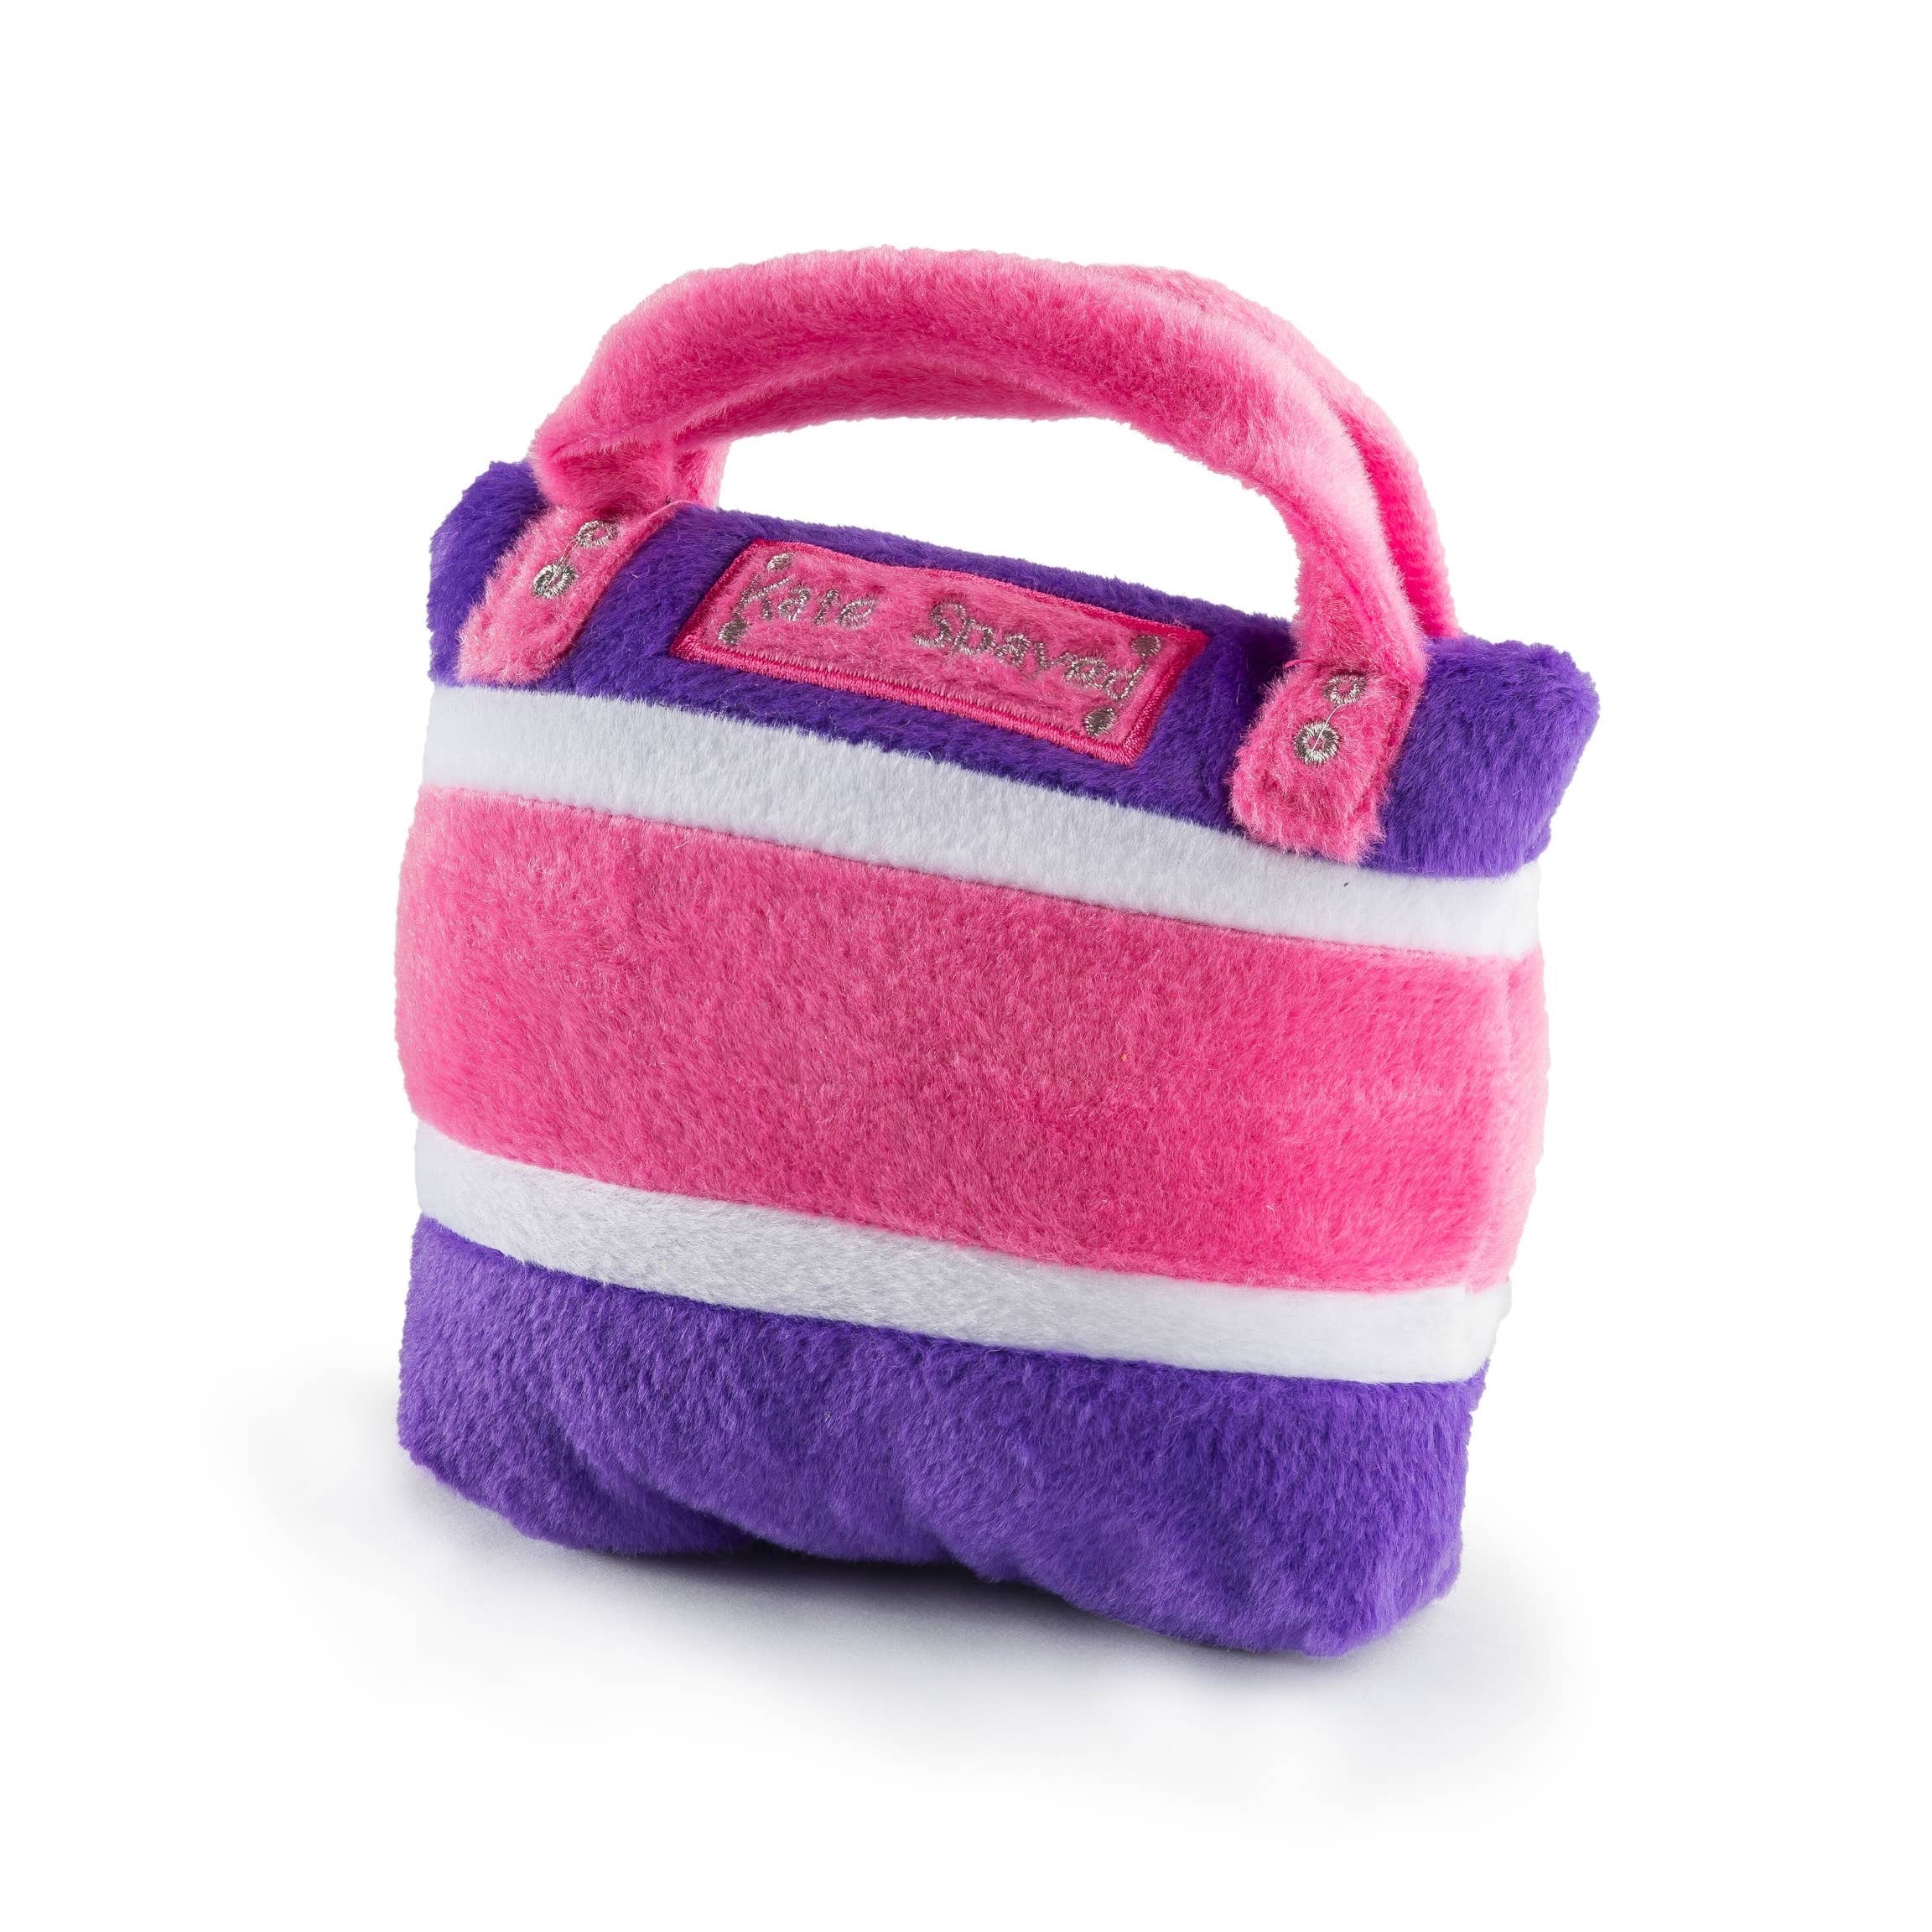 Squeaky Purse Dog Toy